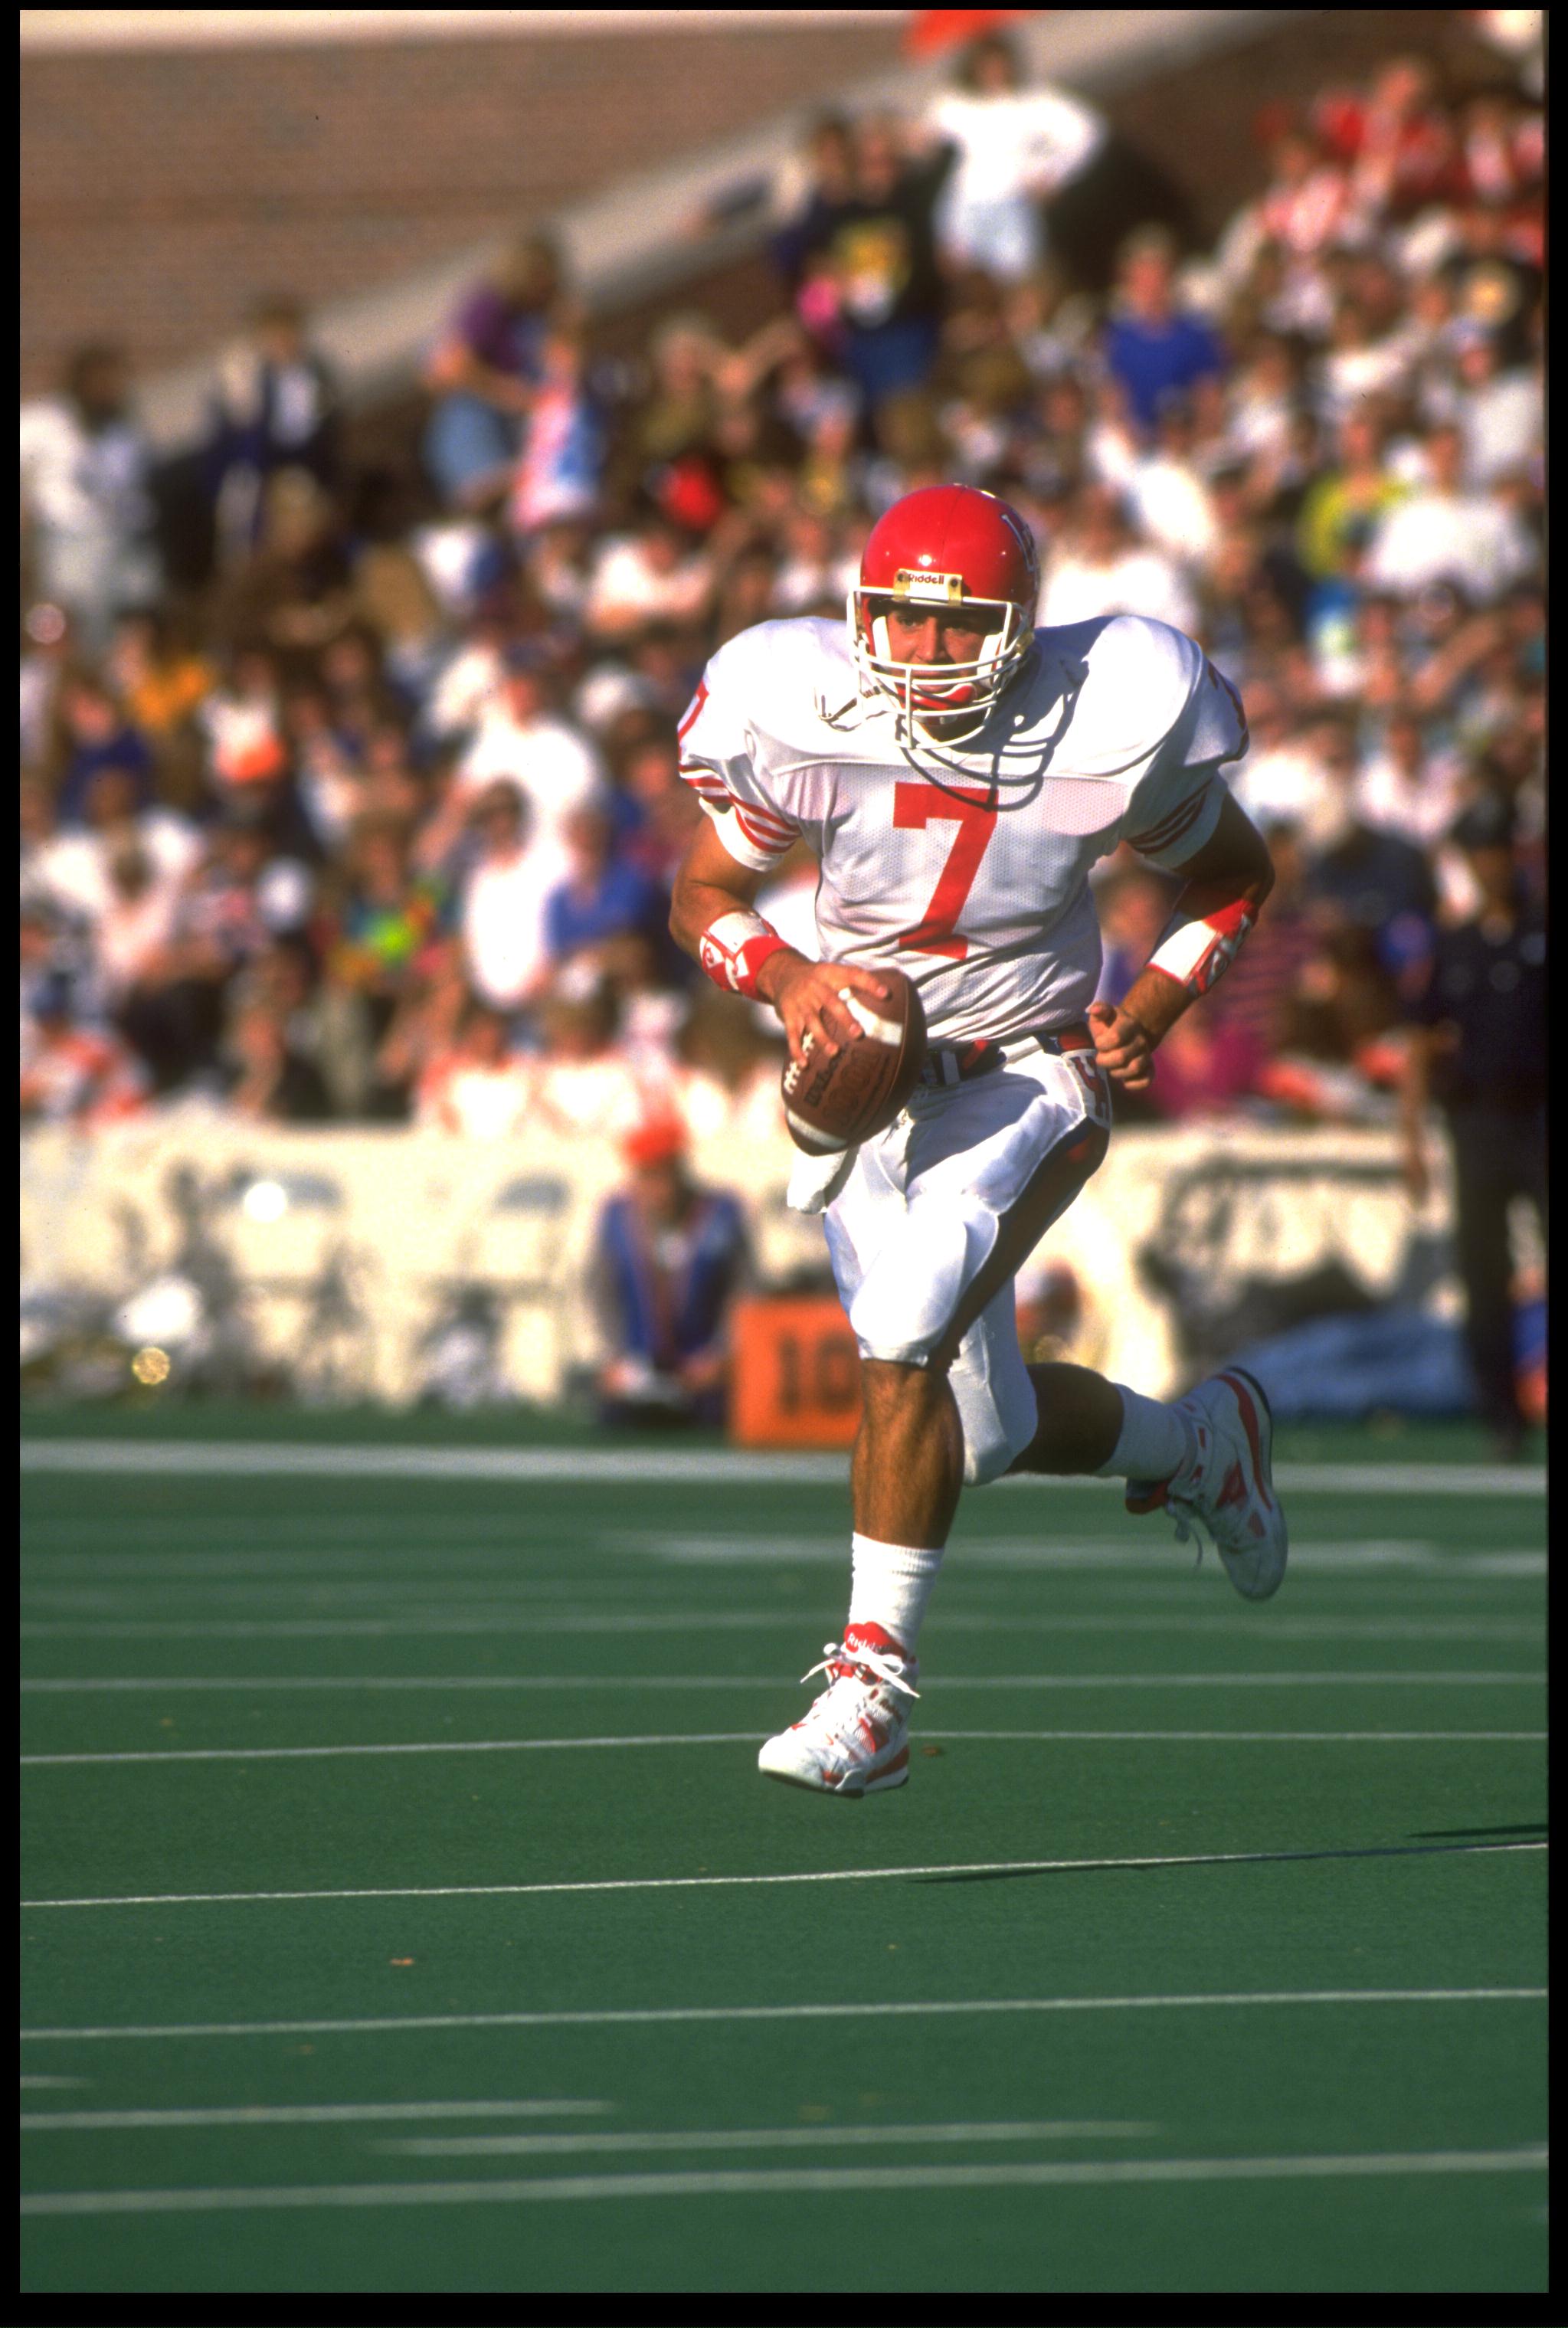 21 Sep 1991: UNIVERSITY OF HOUSTON QUARTERBACK DAVID KLINGLER ROLES OUT TO PASS DURING THEIR 51-10 LOSS TO ILLINOIS AT MEMORIAL STADIUM IN CHAMPAIGN, ILLINOIS.